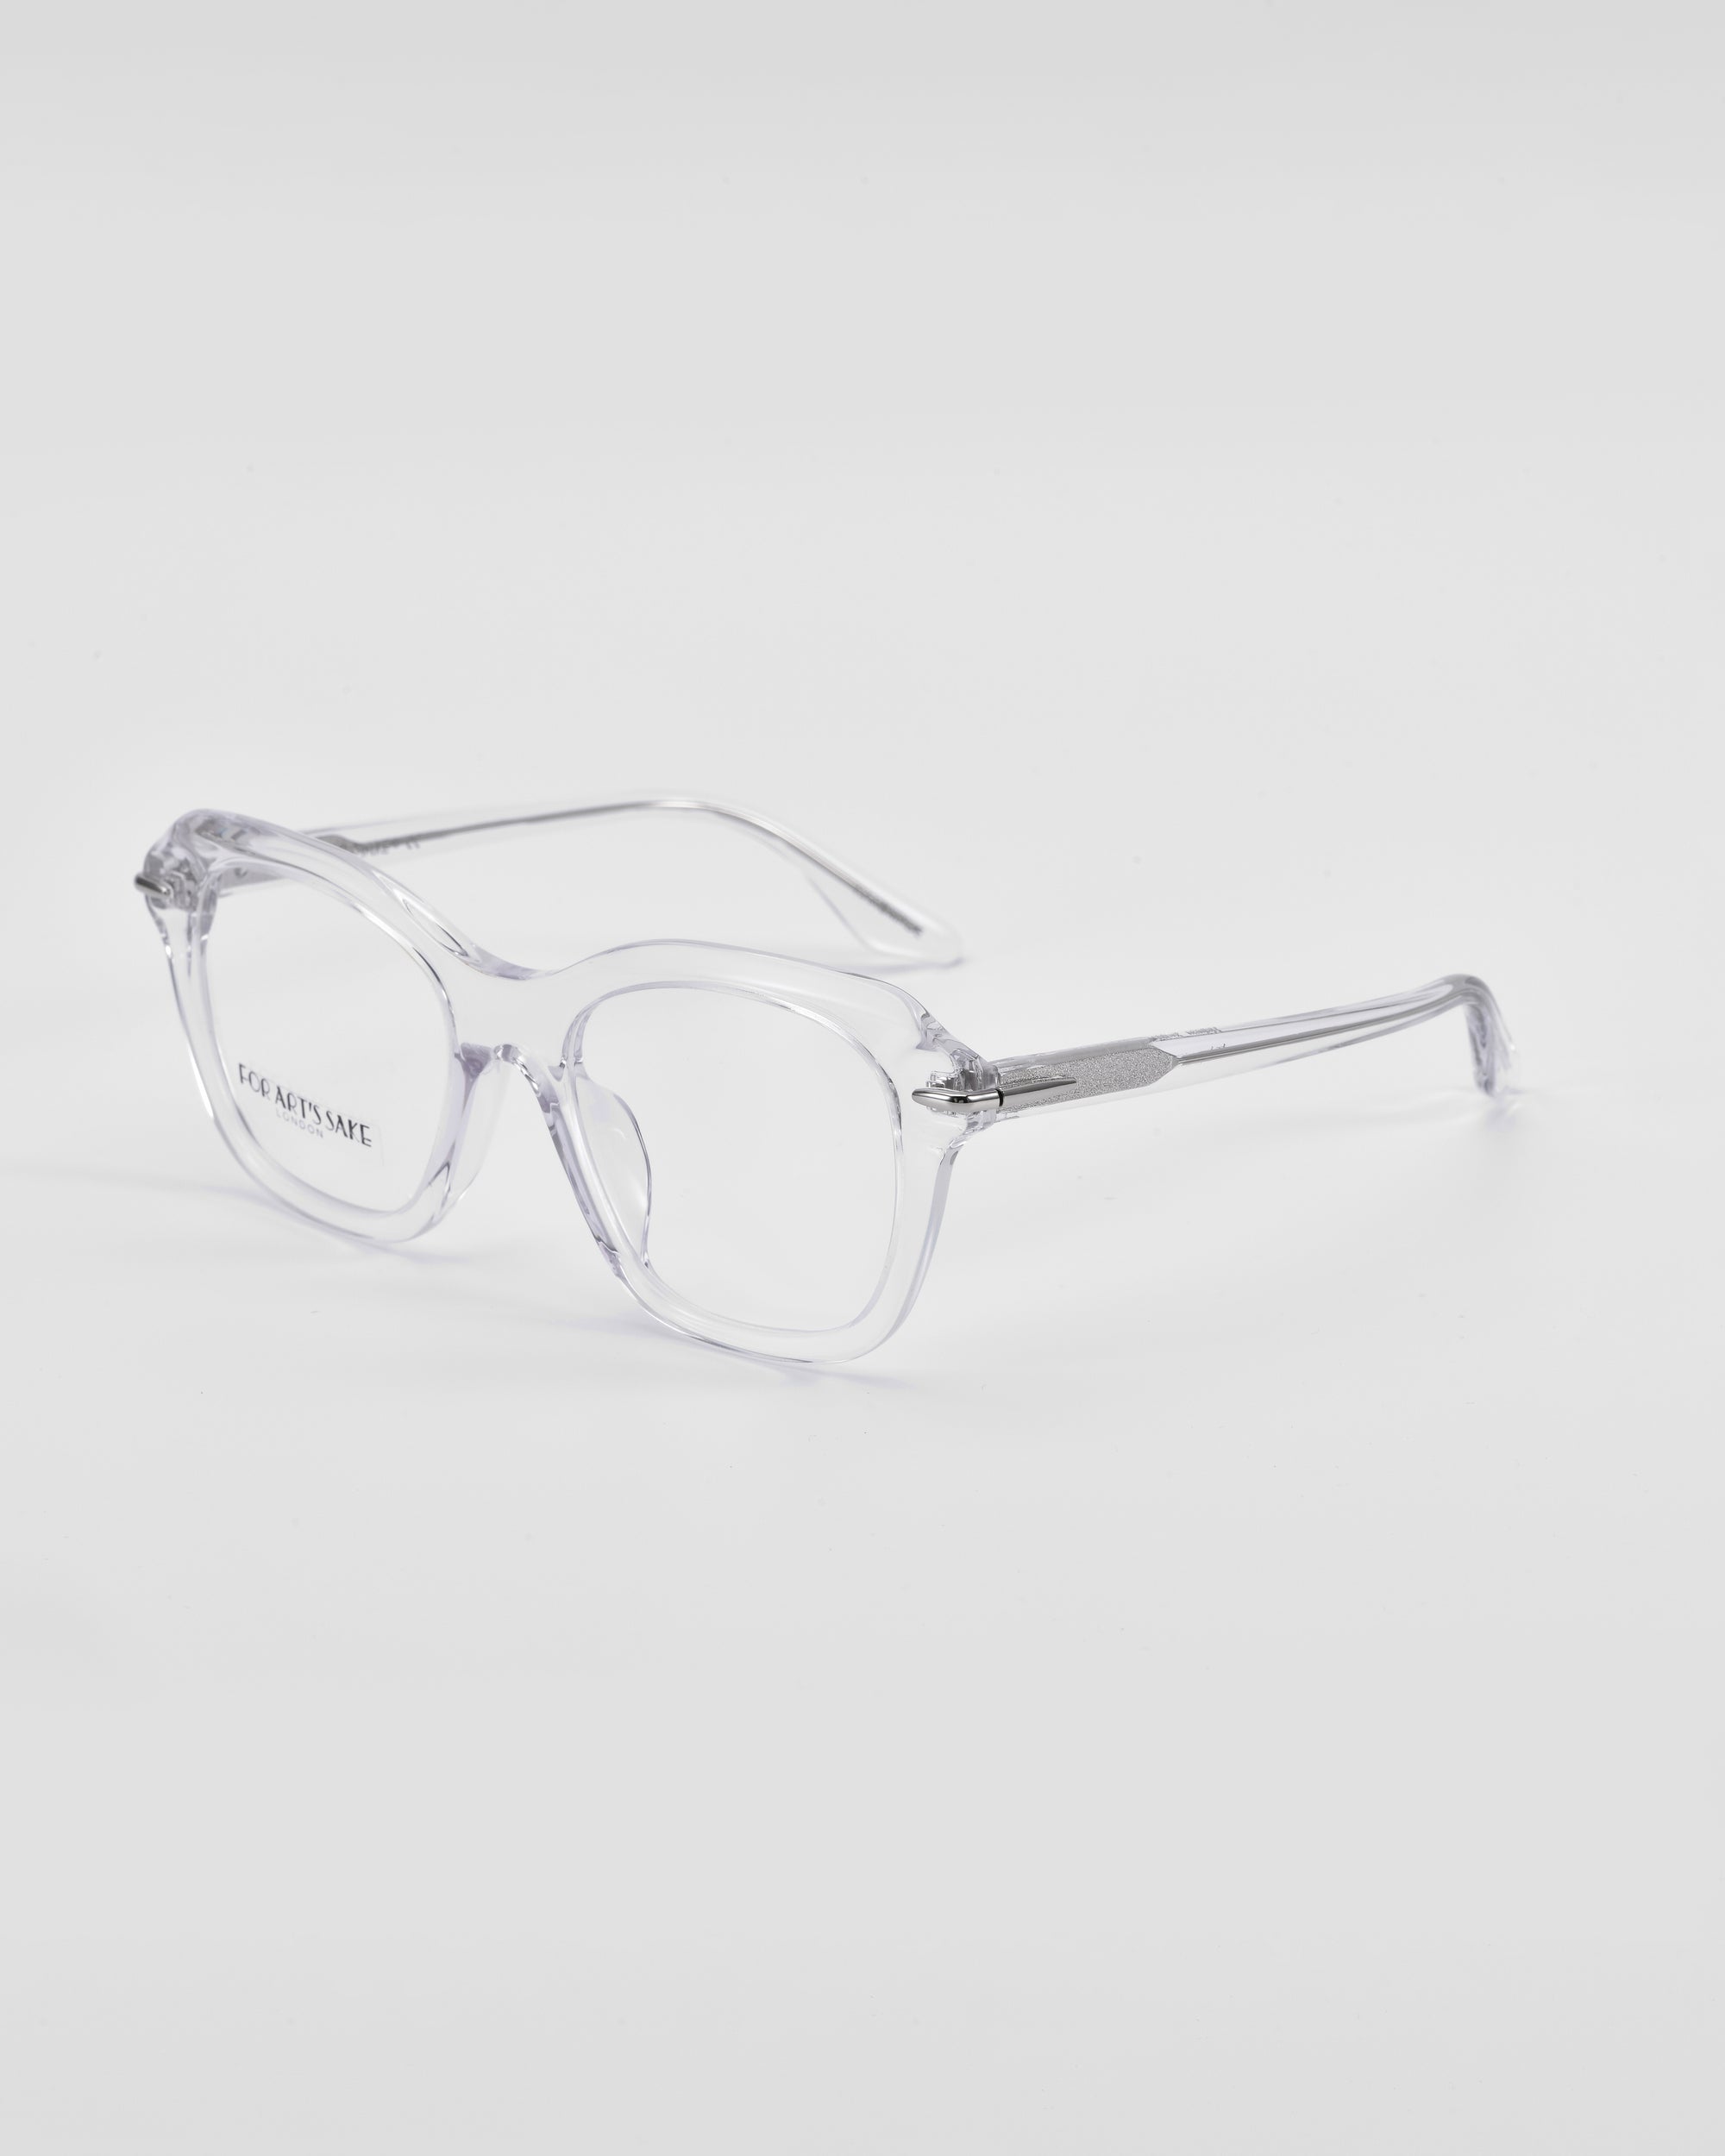 A pair of clear, transparent Helene by For Art&#39;s Sake® eyeglasses with square frames is placed on a white surface. The lenses are large with a slight retro style, and the temples feature 18-karat gold plating near the hinges. The glasses have a simple and minimalist design perfect for those seeking both elegance and functionality.